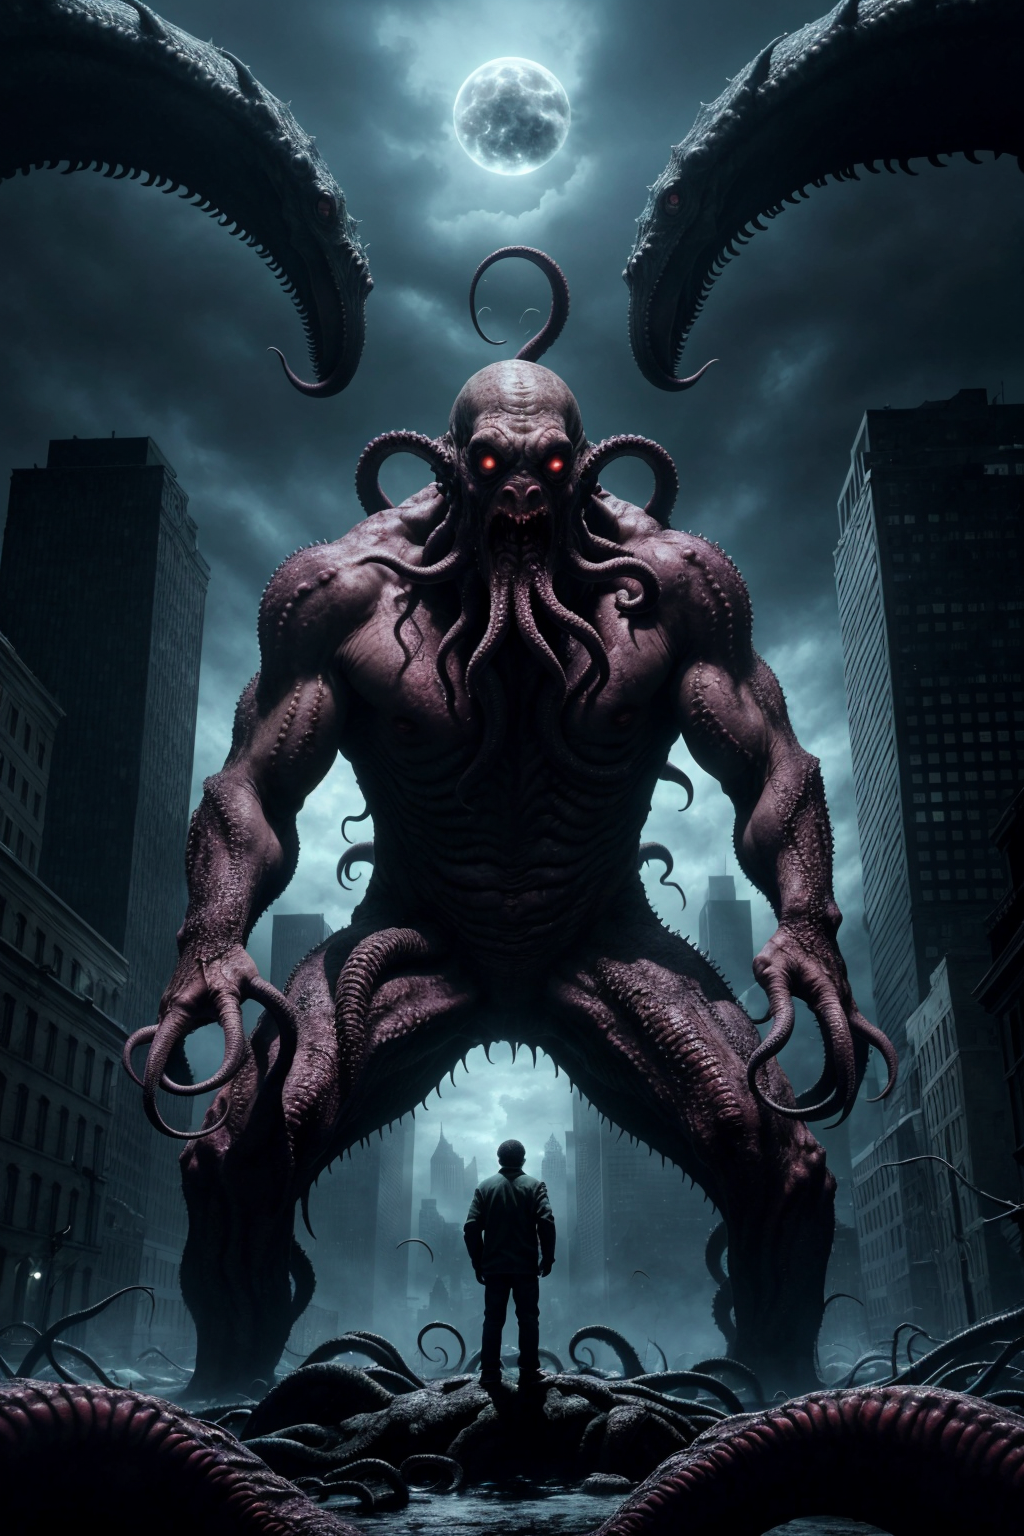 epic lovecraft theme, giant cthulhu (looks down:1.1) BREAK small angry man looks up, monsters from deep, tentacles, horror...